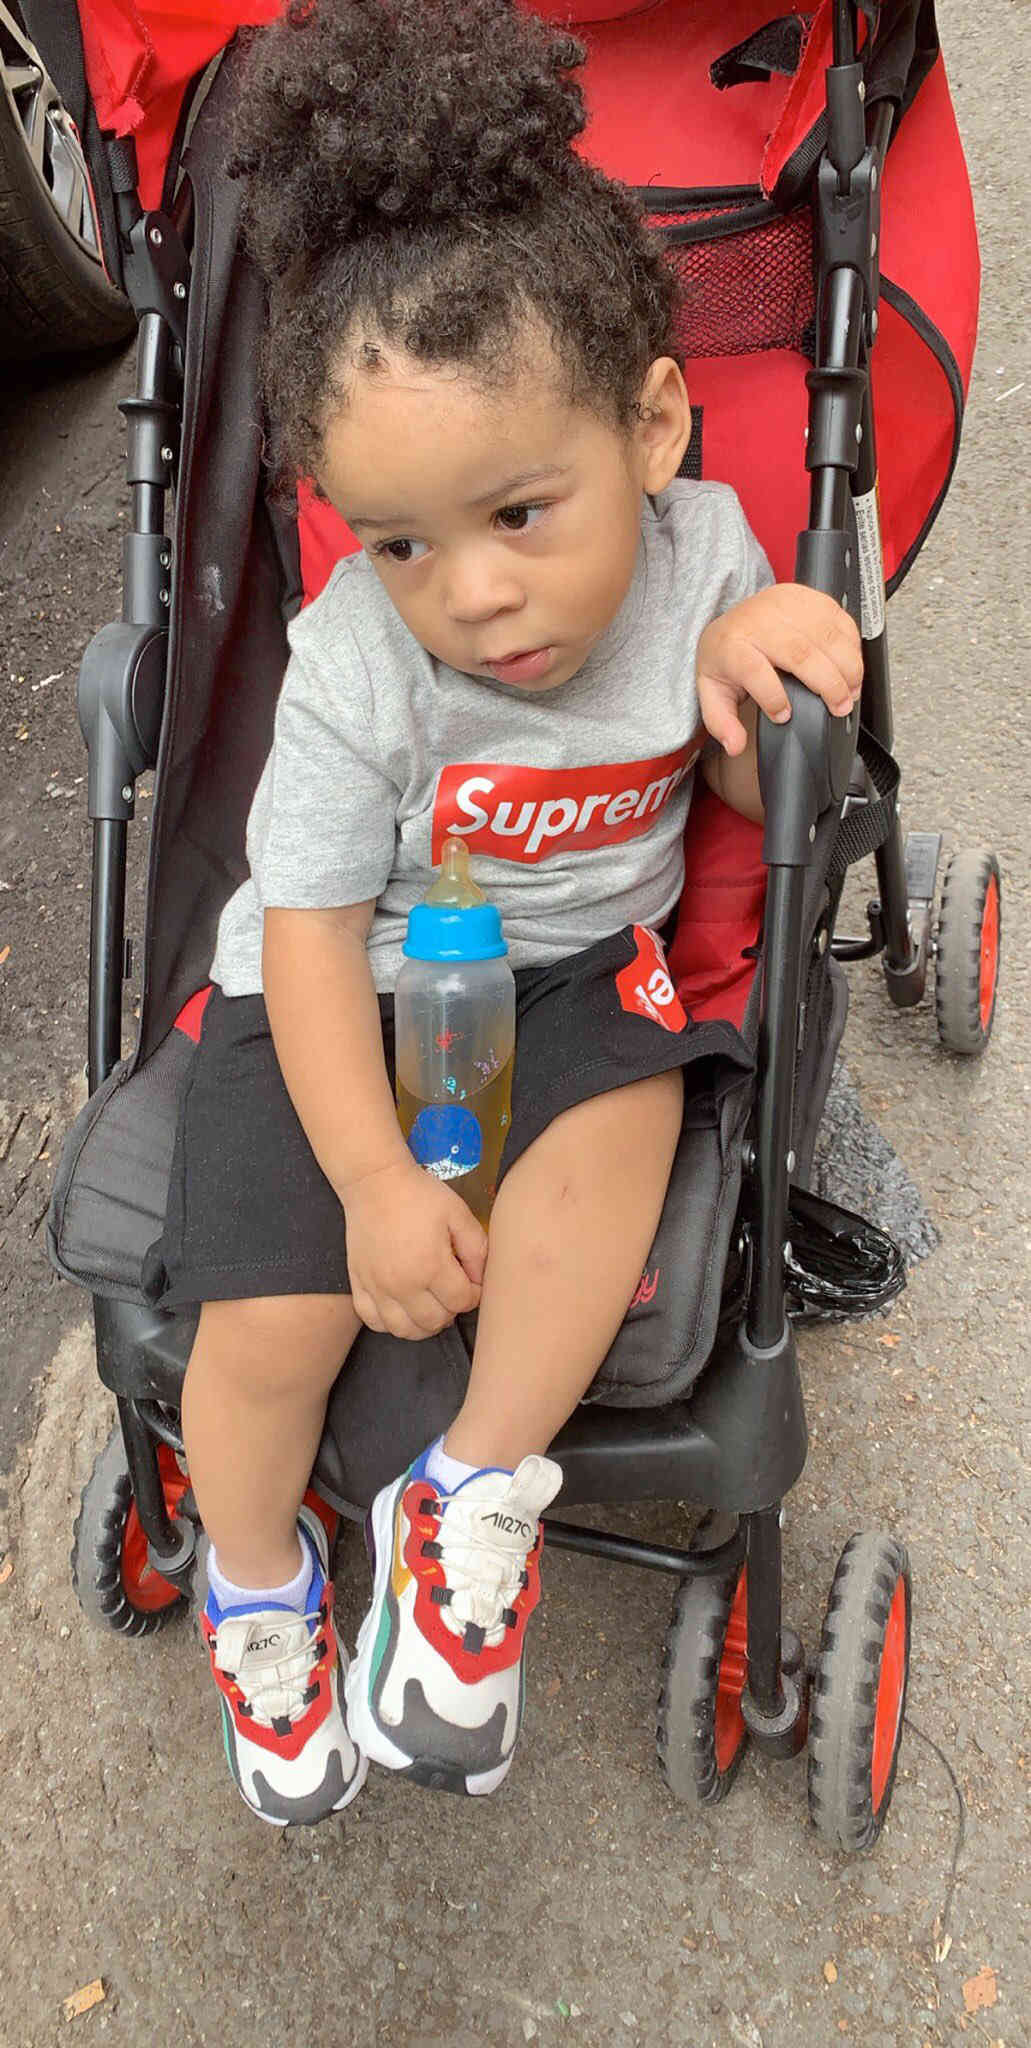 Cops find 1-year-old boy who was inside car when it was stolen in Crown Heights